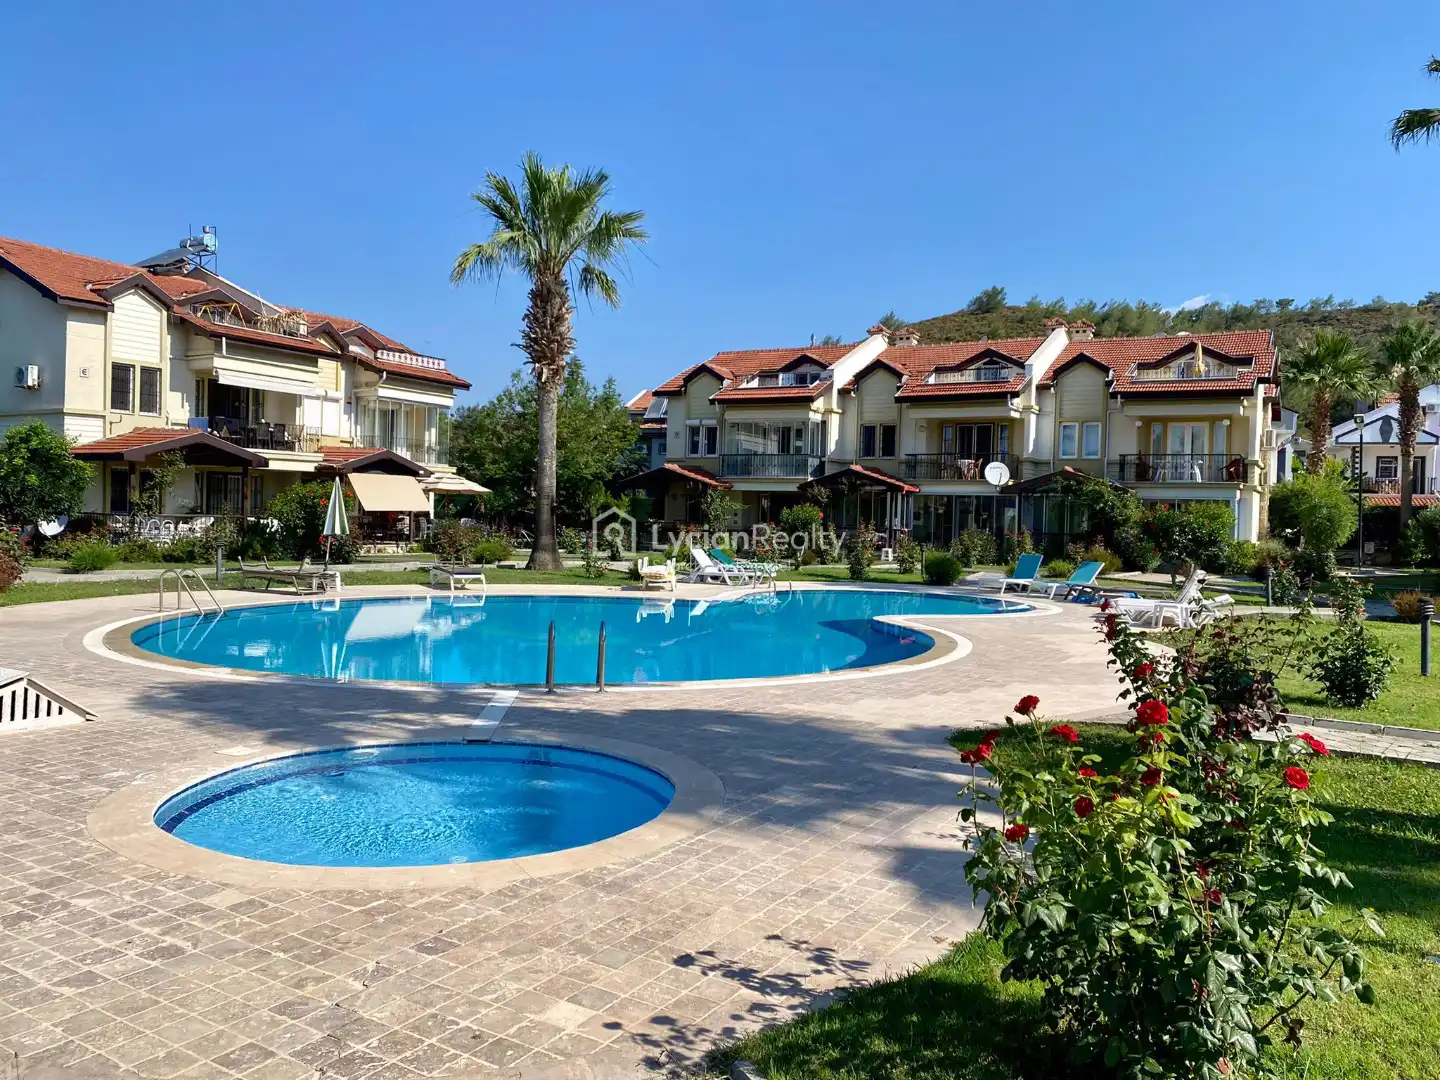 Flat Green - Turkish Houses with Large Gardens and Pools